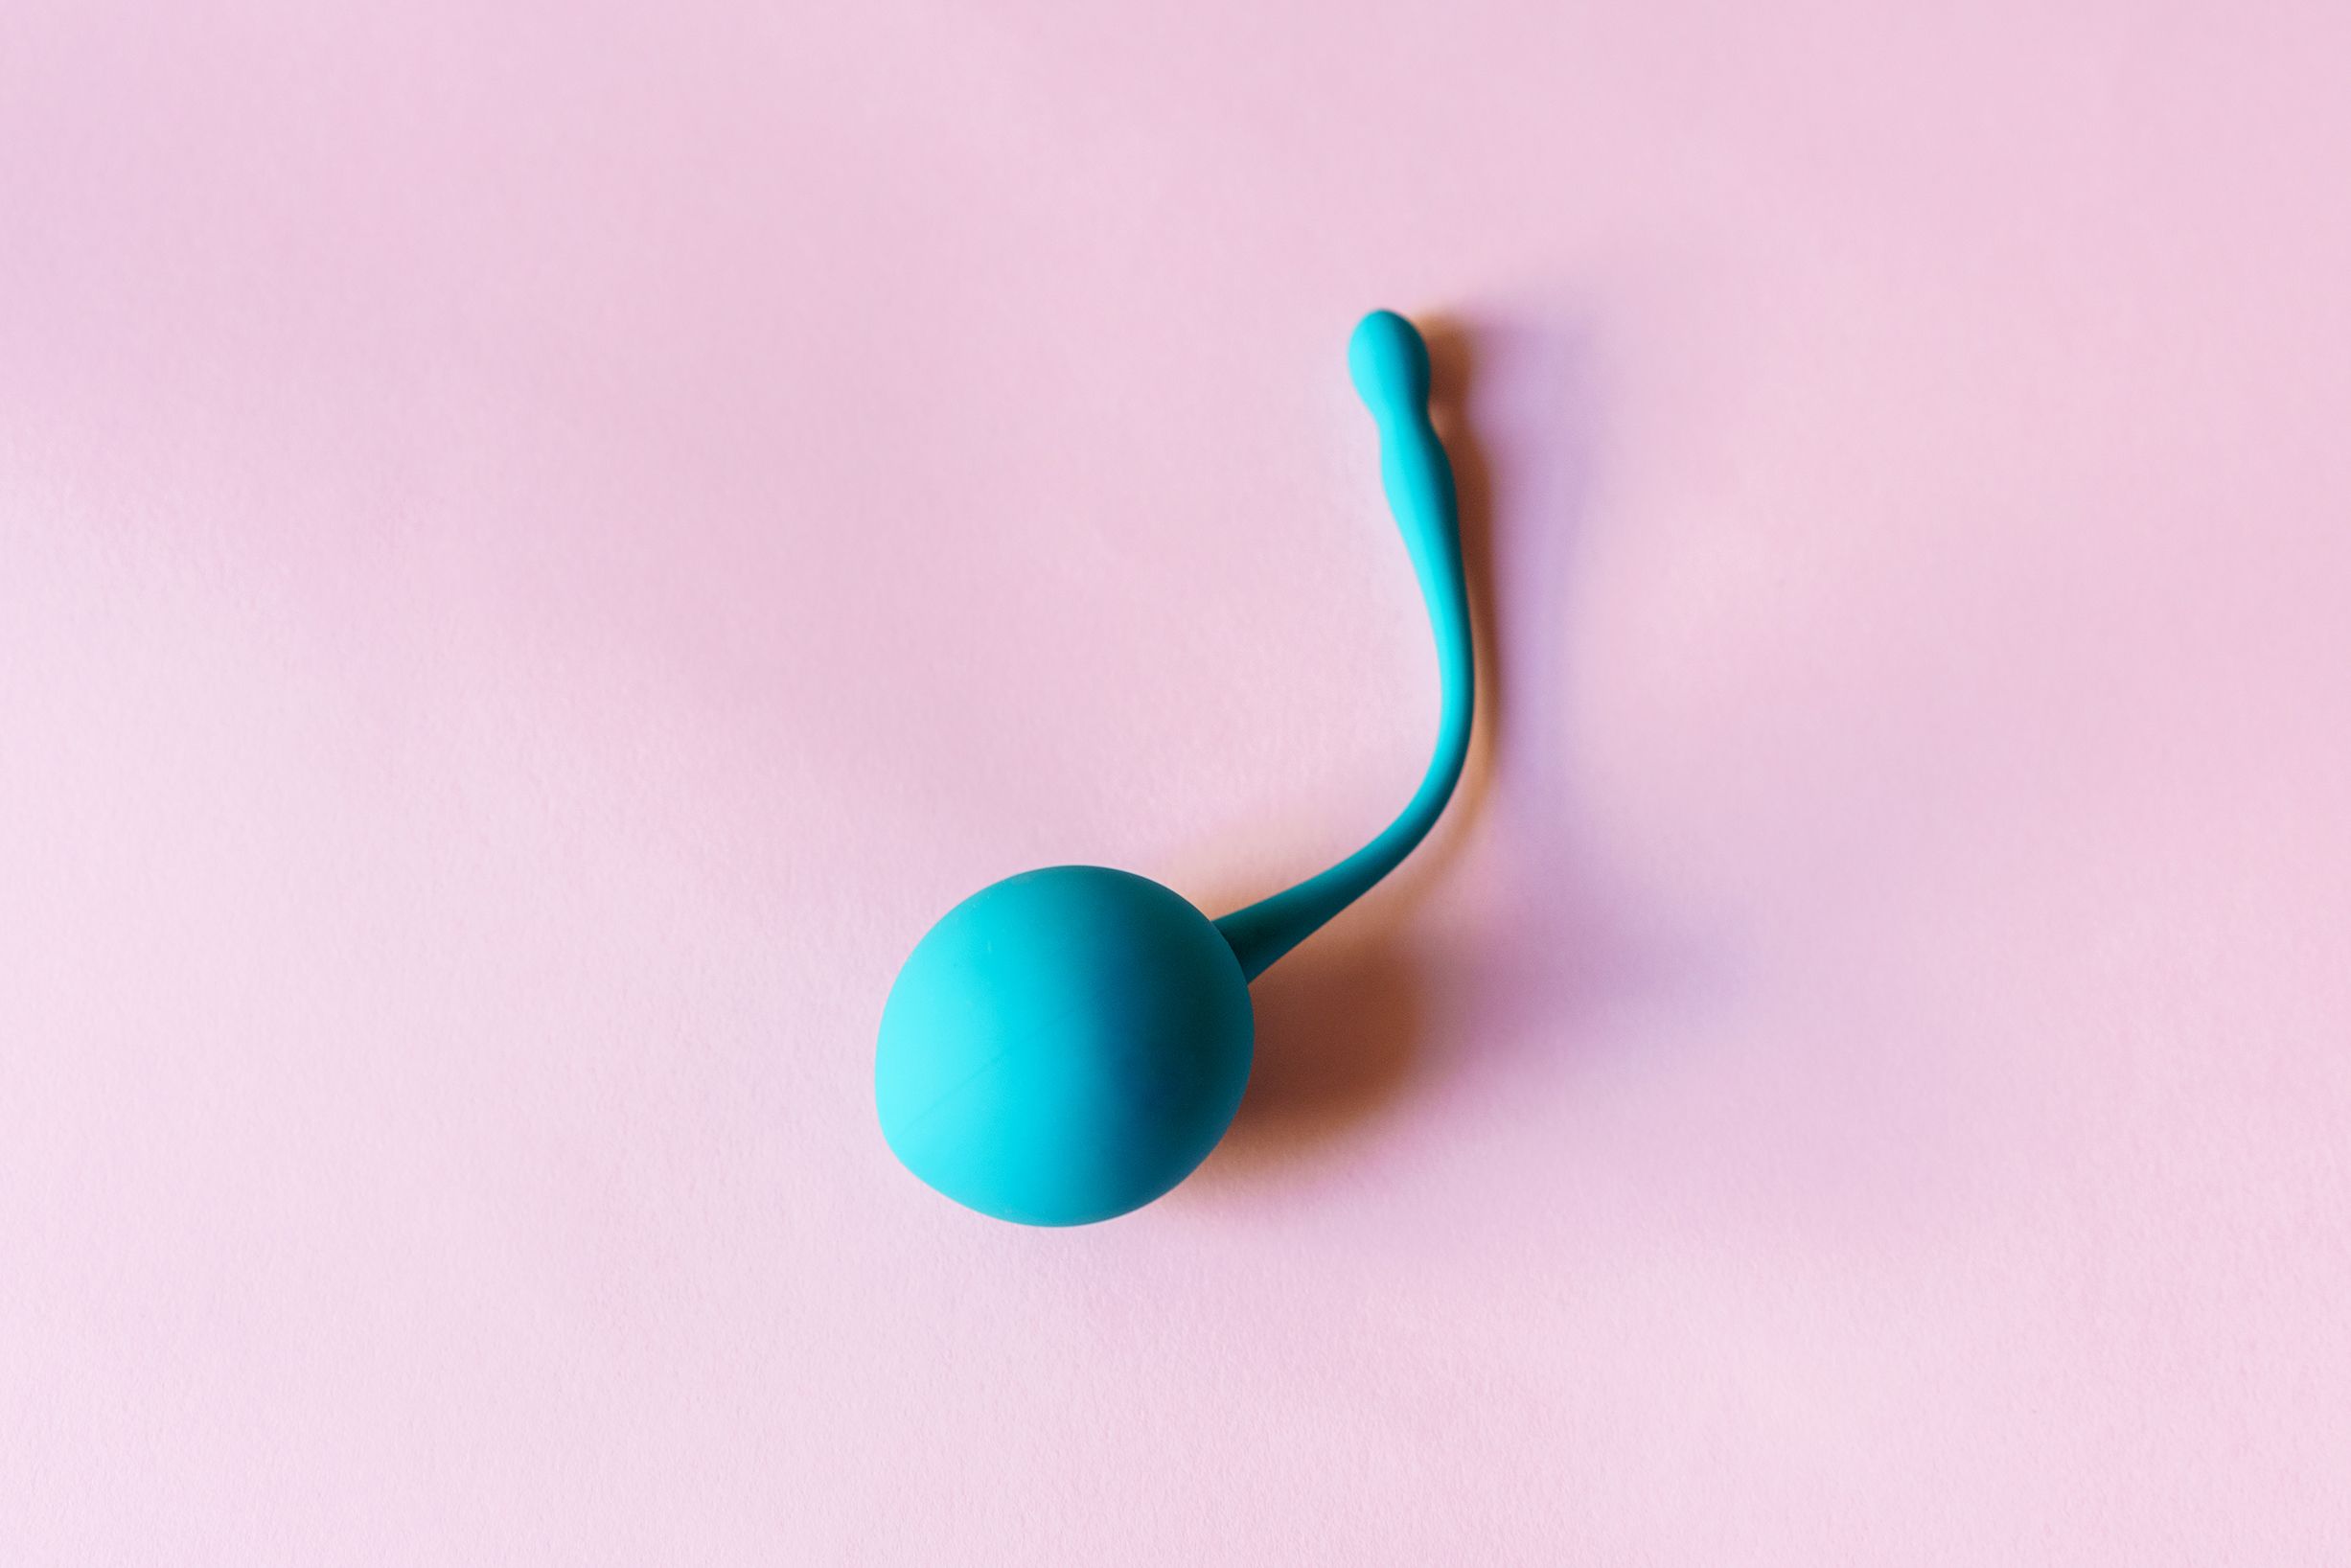 What Are Kegel Balls Used For